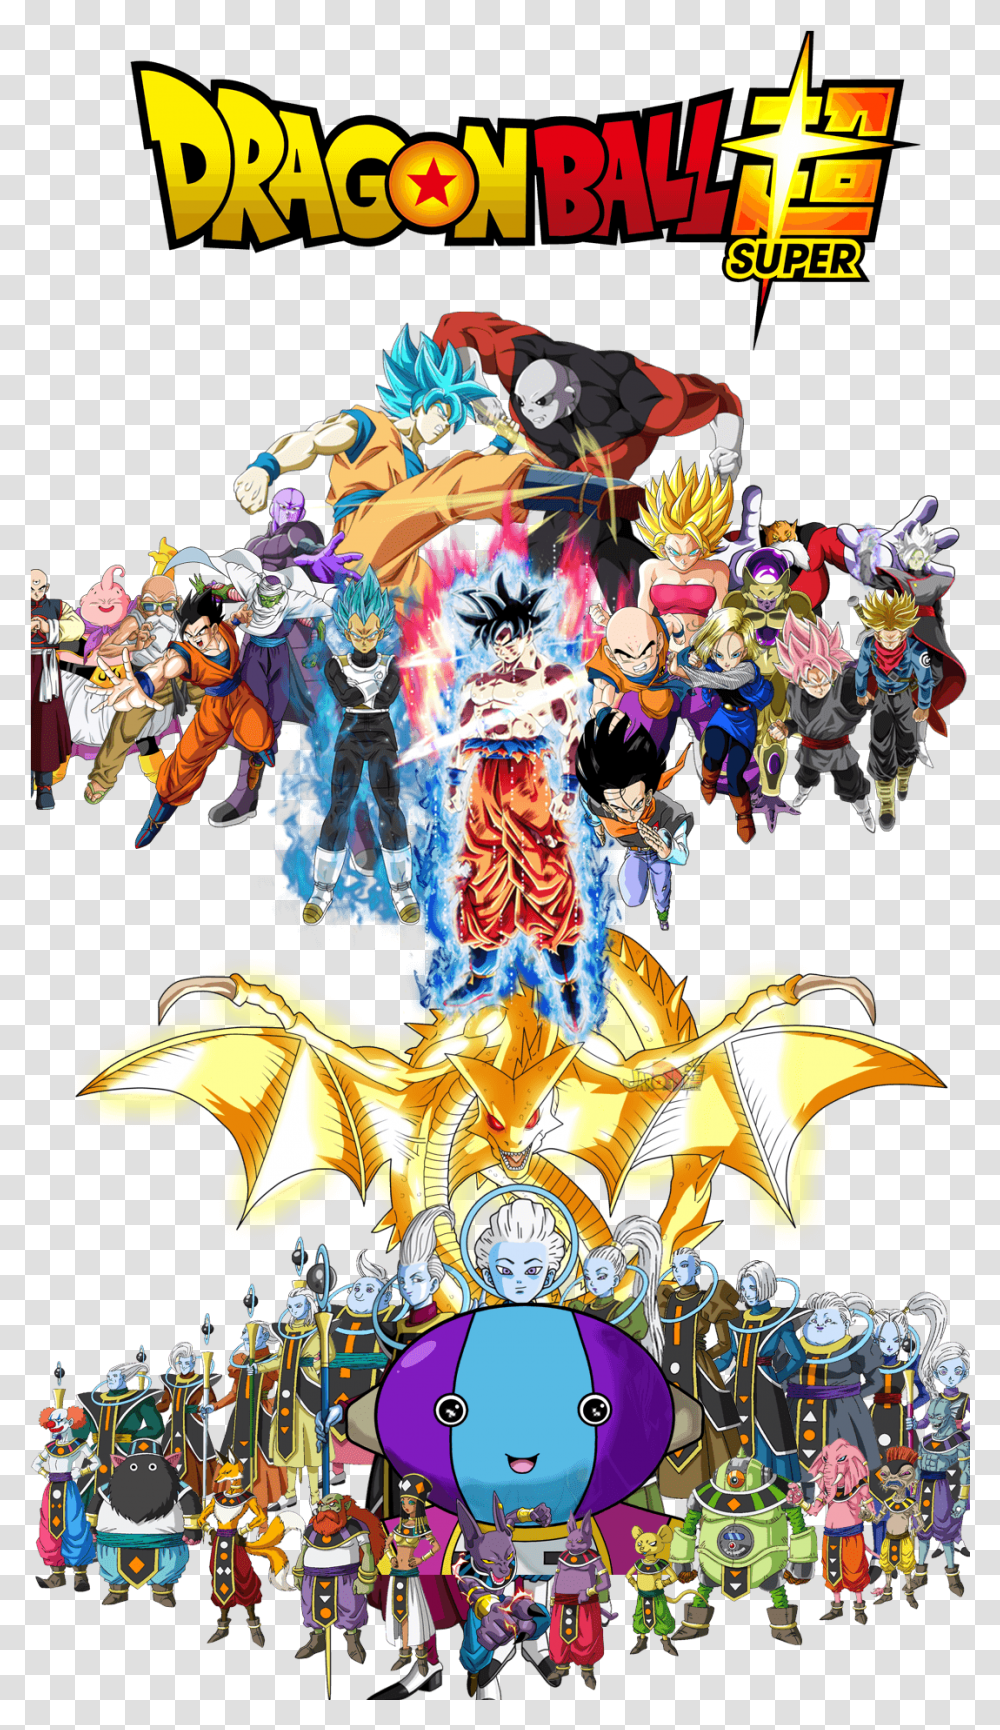 Download Free Dragon Ball Z Iphone Wallpapers Top Free Dragon Ball Wallpaper Iphone, Advertisement, Poster, Collage, Comics Transparent Png